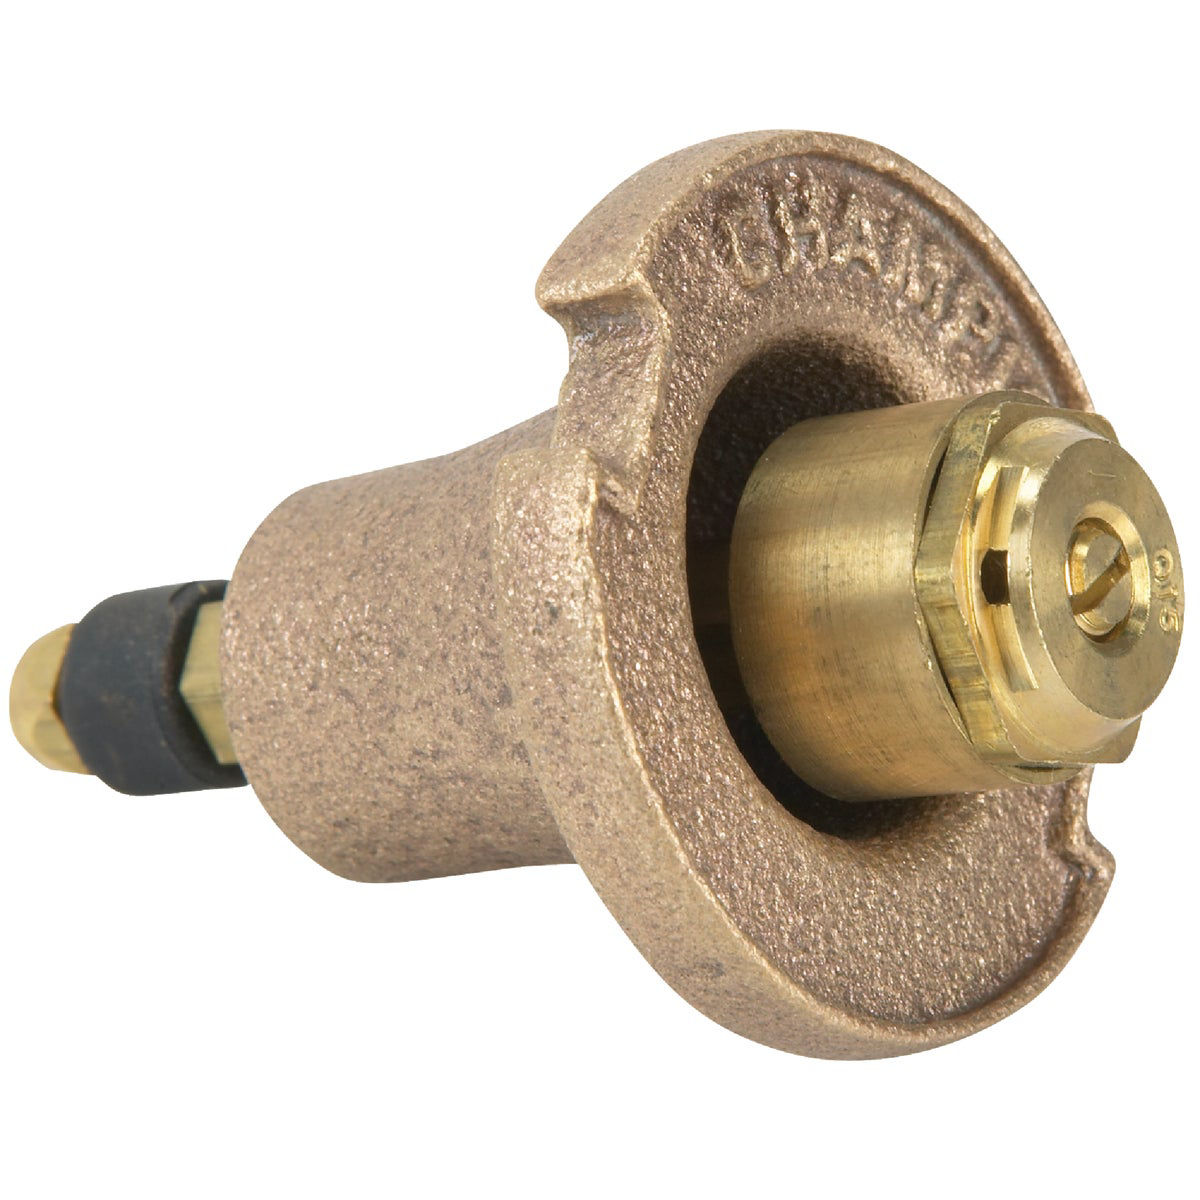 Champion 1.25 In. Quarter Circle Brass Pop-Up Sprinkler with Brass Nozzle